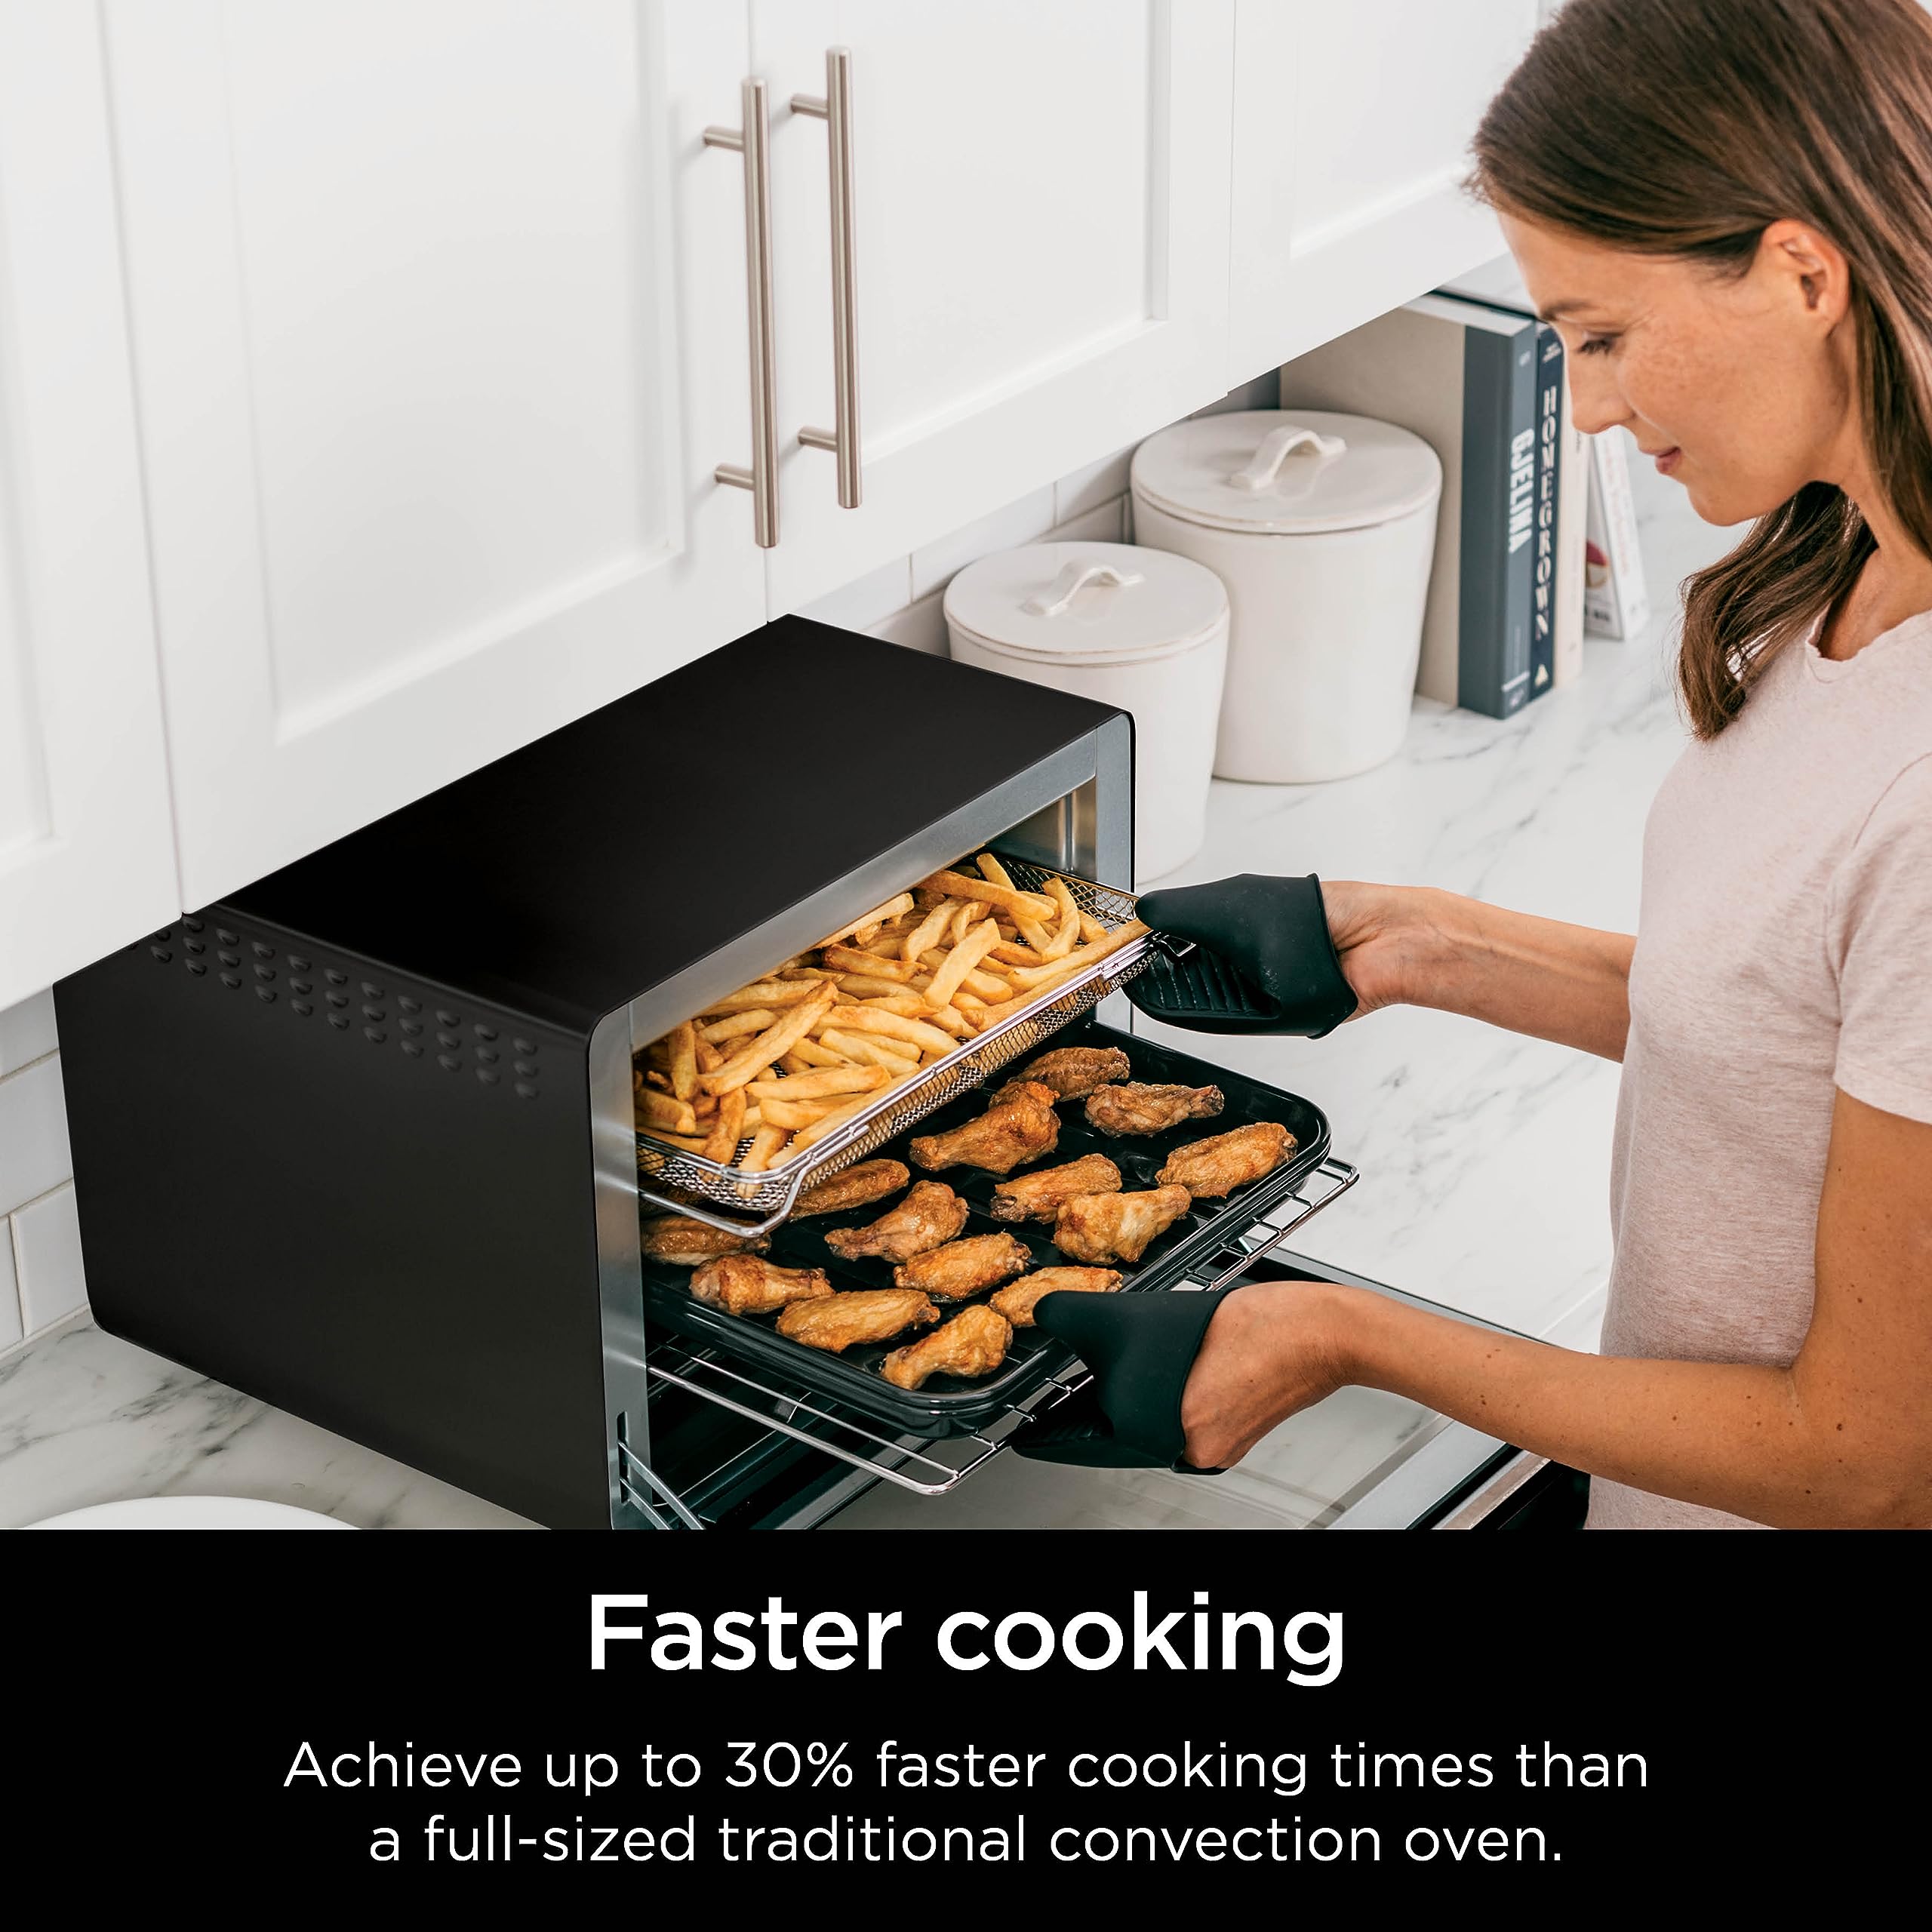 Ninja DT202BK Foodi 8-in-1 XL Pro Air Fry Oven, Large Countertop Convection Oven, Digital Toaster Oven, 1800 Watts, Black